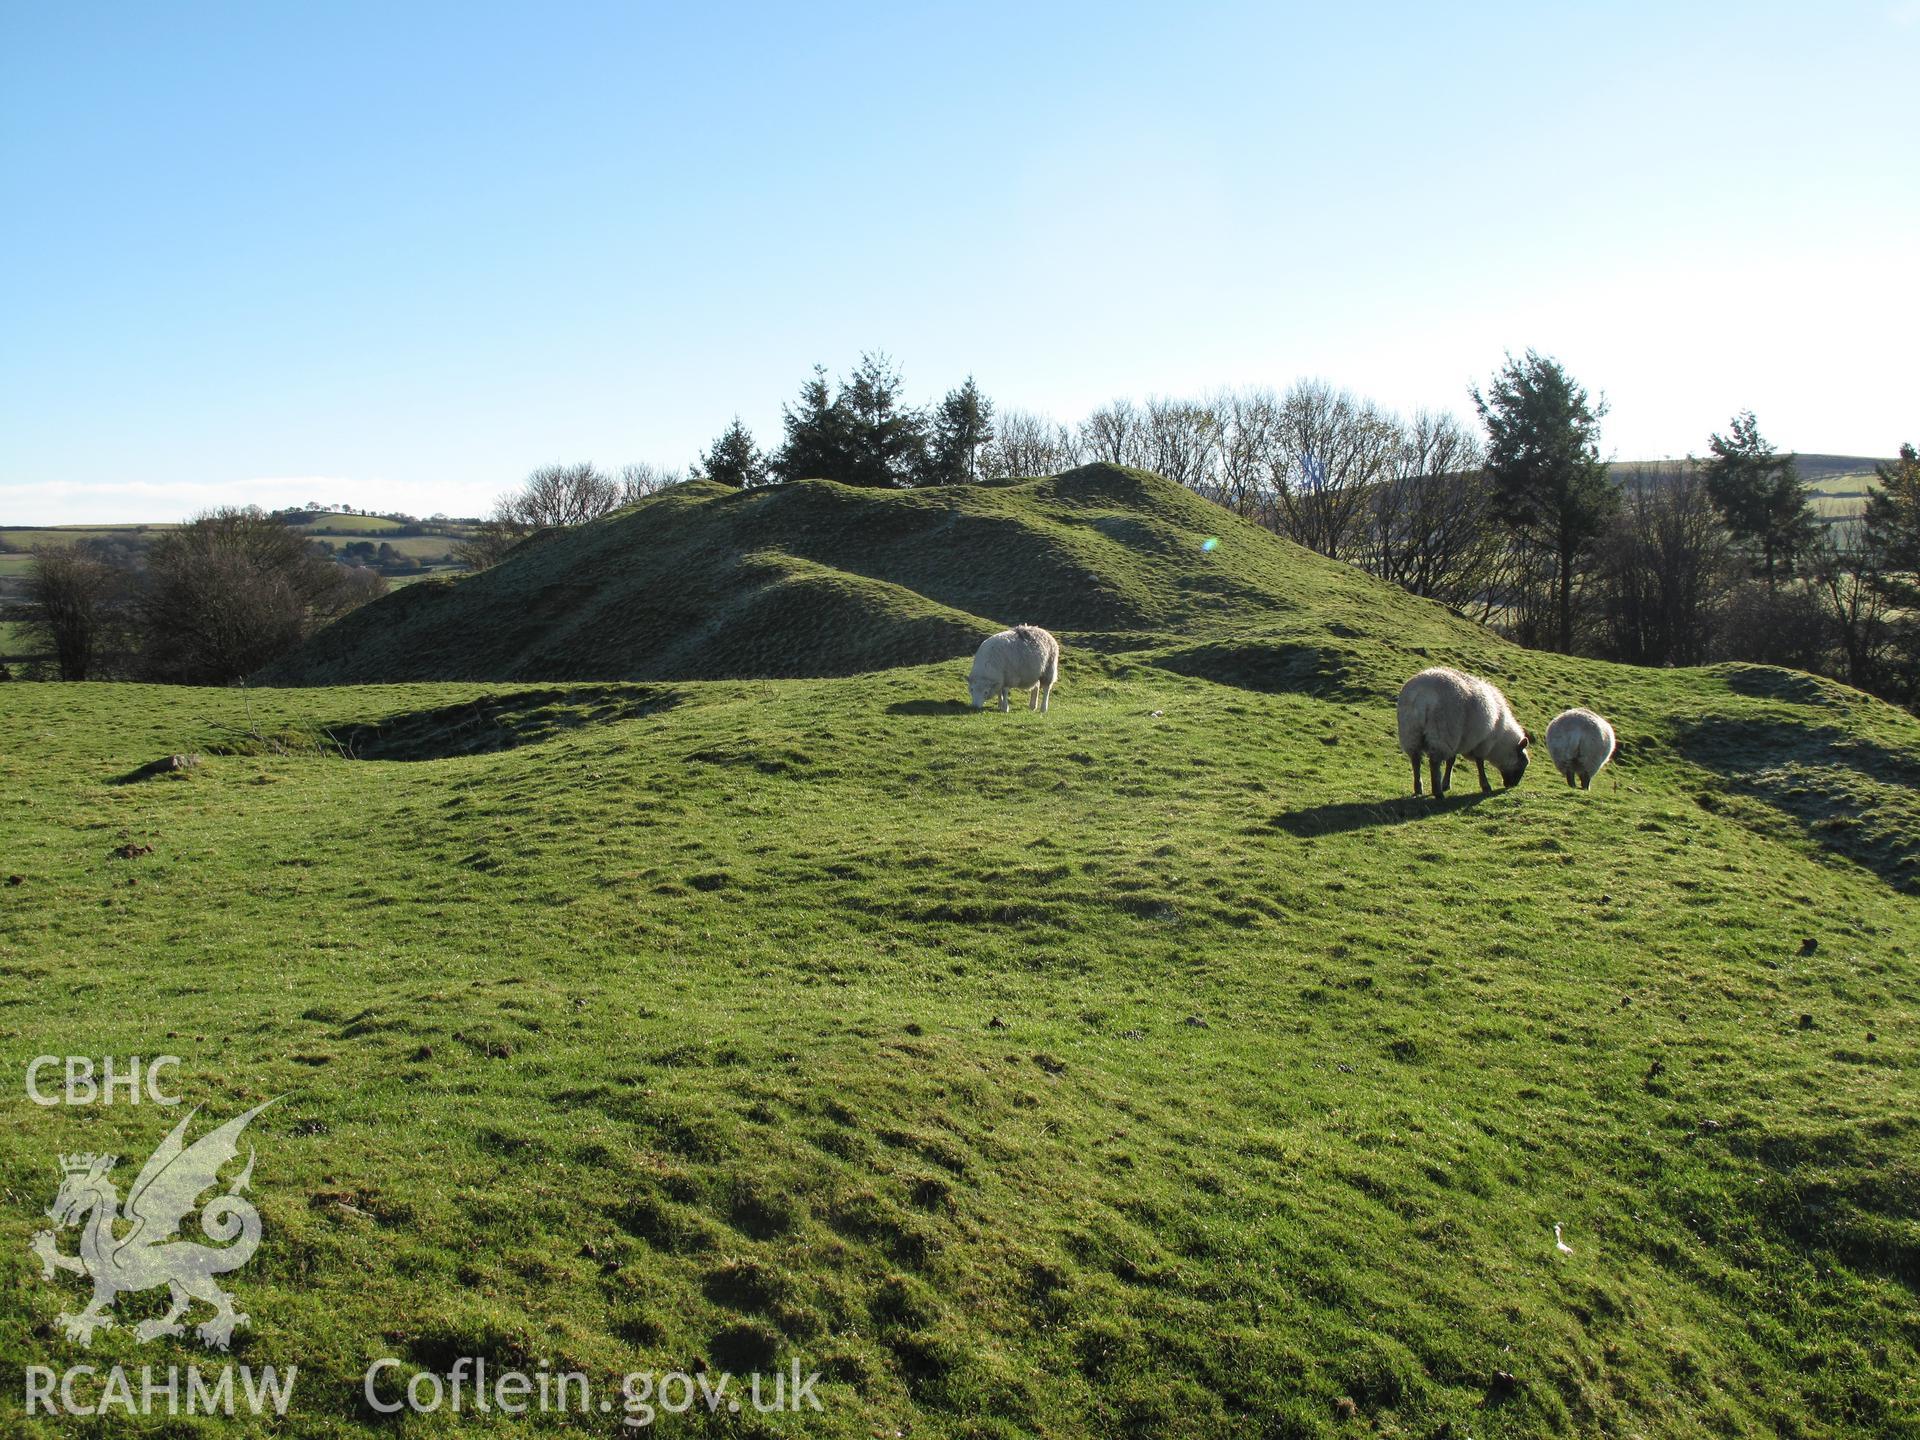 Painscastle motte from the northwest, taken by Brian Malaws on 15 November 2010.